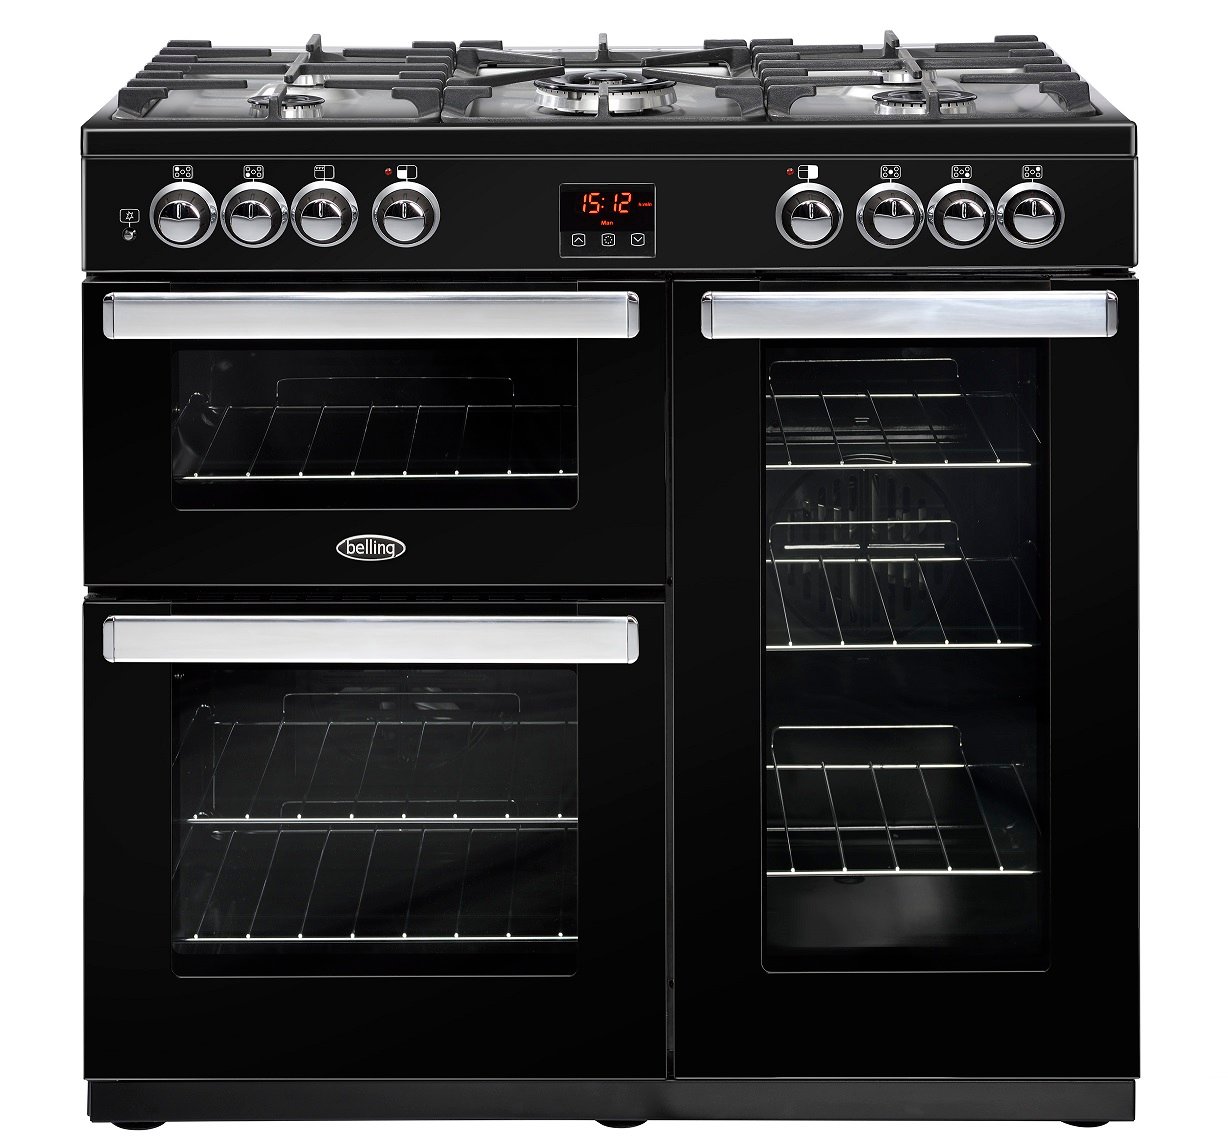 90cm dual fuel range cooker with 4kW PowerWok, Maxi-Clock, market leading tall oven and easy clean enamel.